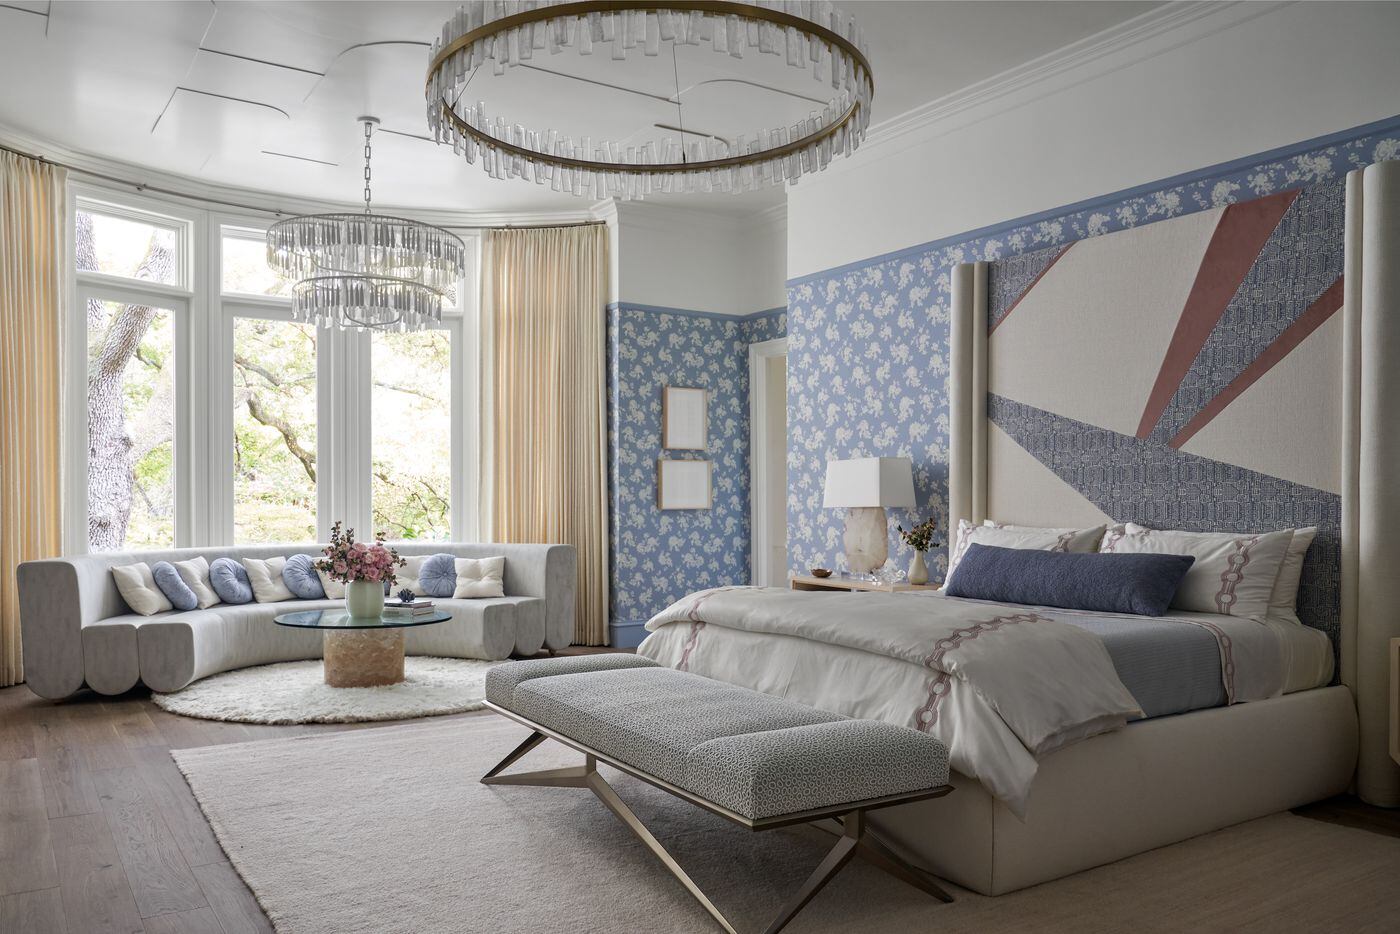 The primary bedroom in the 2022 Kips Bay Decorator Show House Dallas was designed by Natasha...